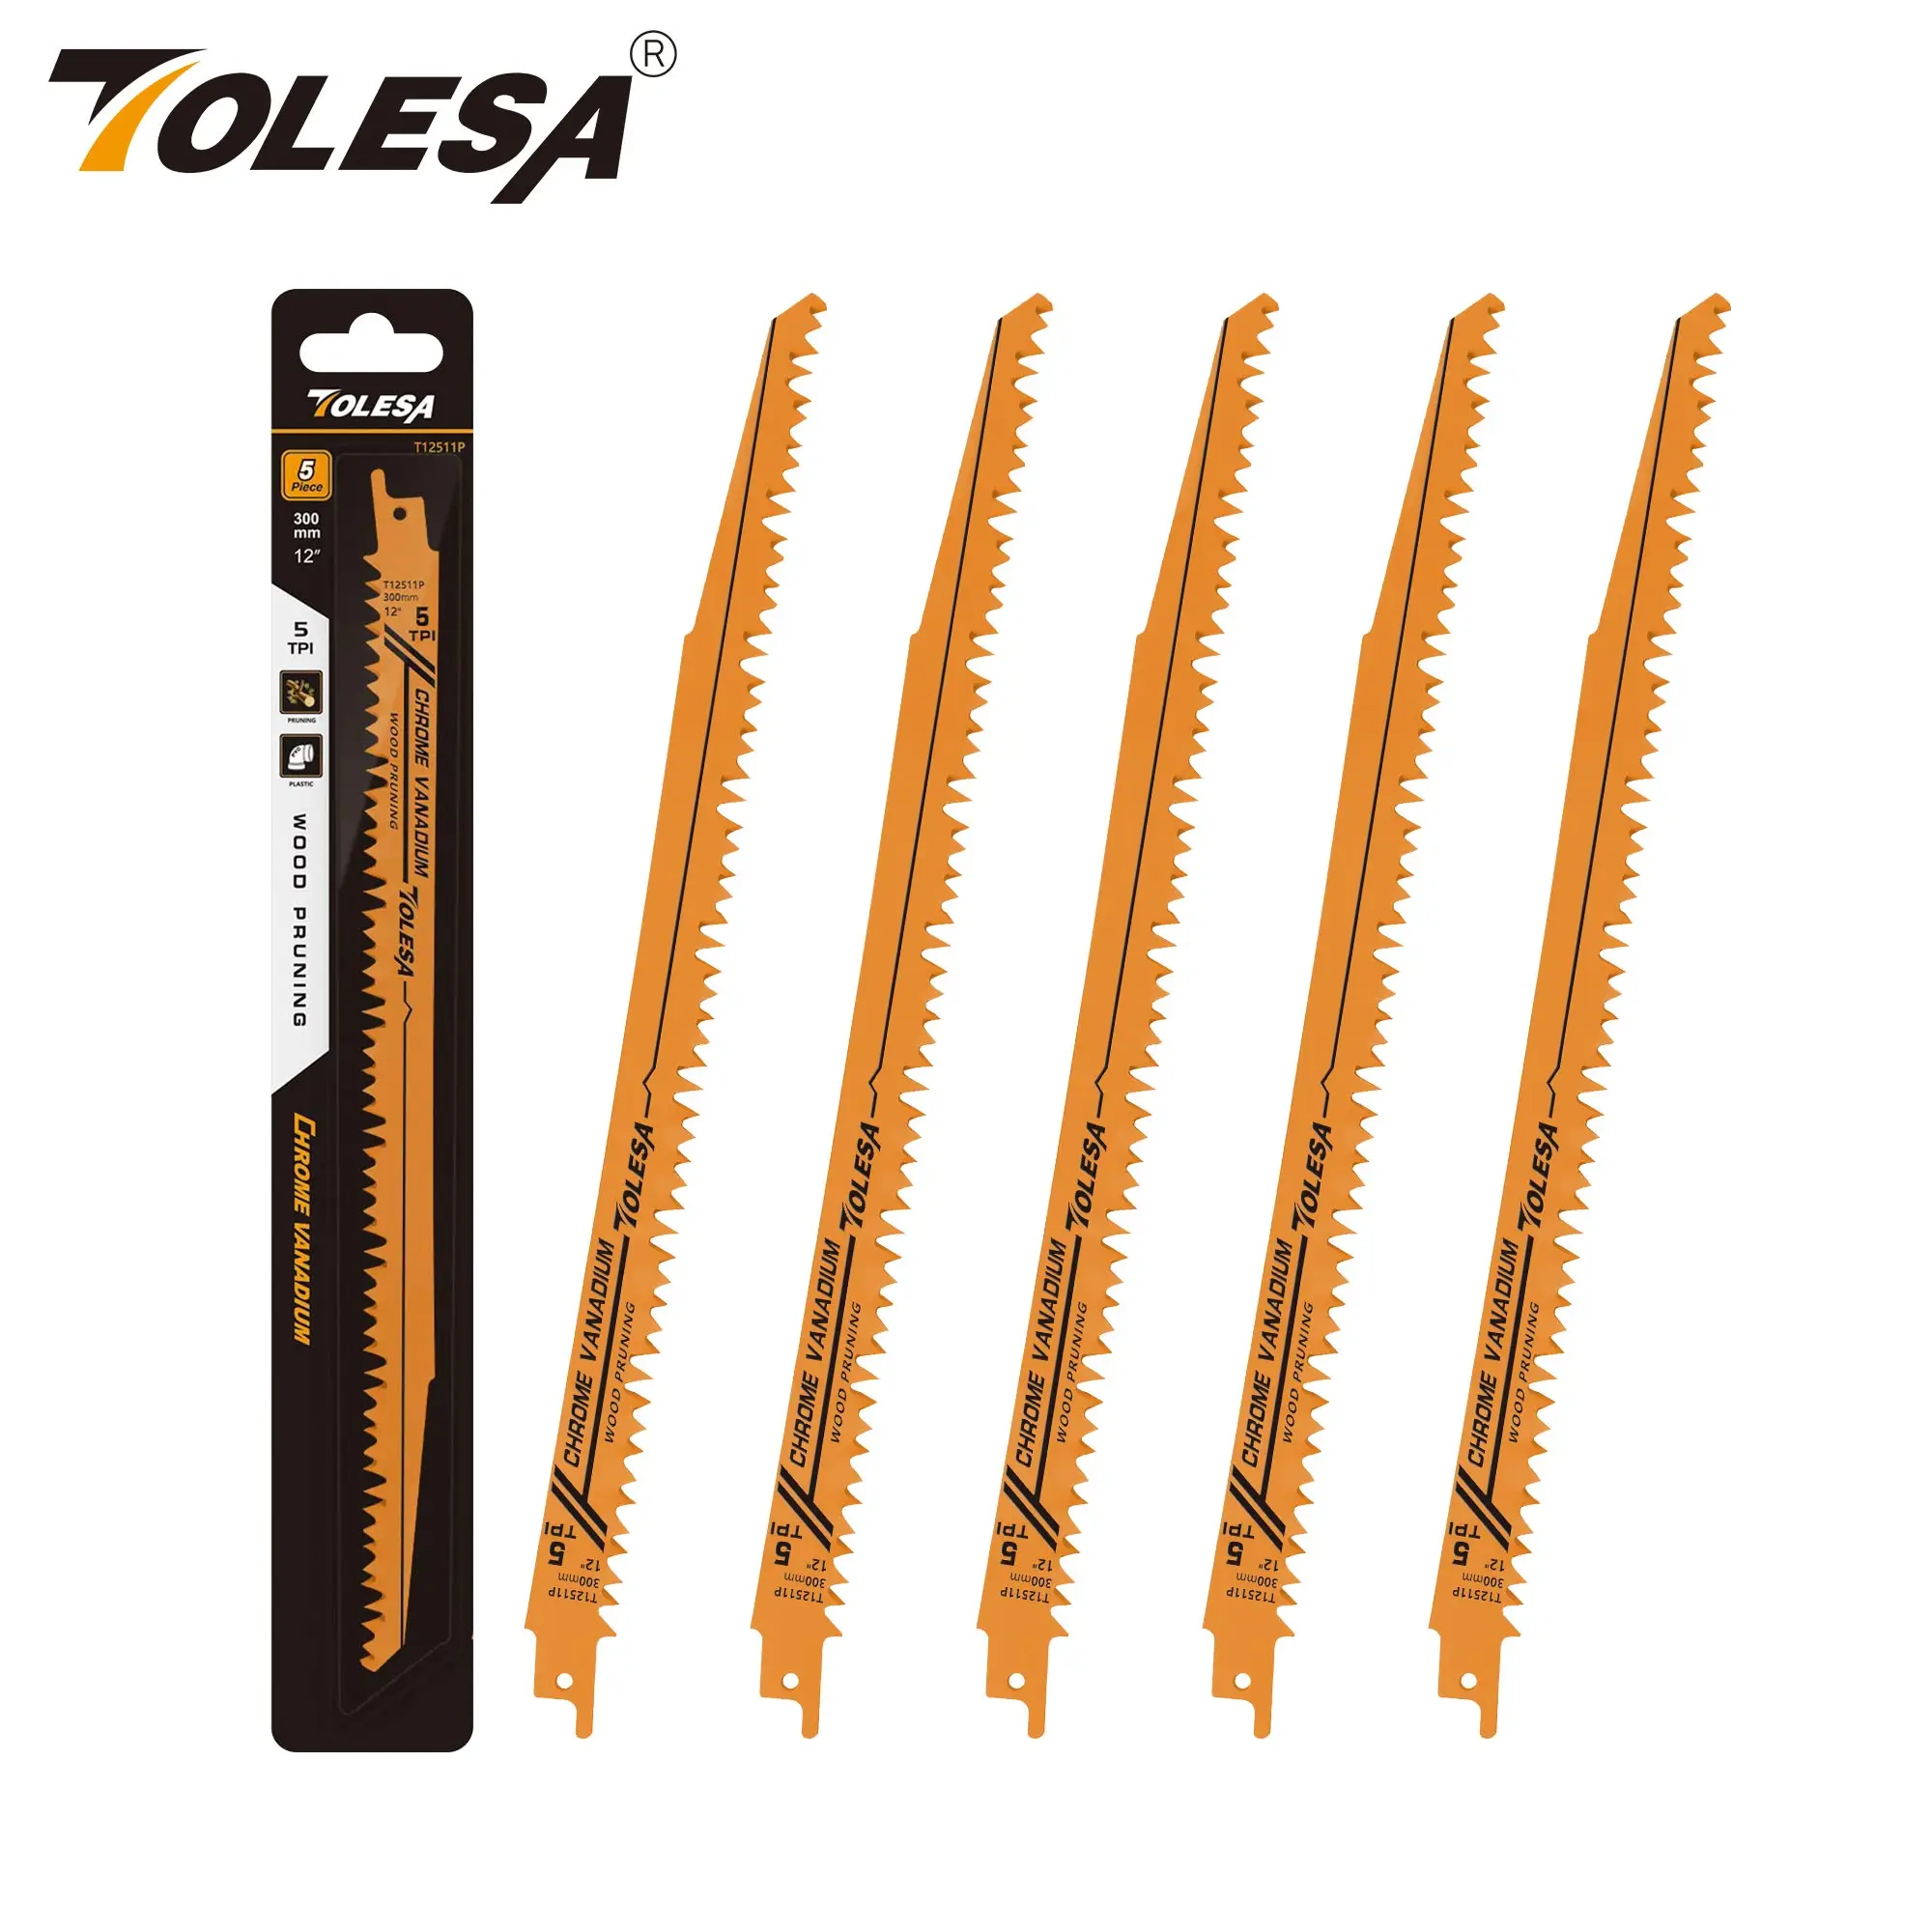 TOLESA 5PCS 5/6TPI Wood Pruning Reciprocating Saw Blades for Wood and PVC Pipe Cutting CRV Sharp Ground Teeth Sabre Saw Blades